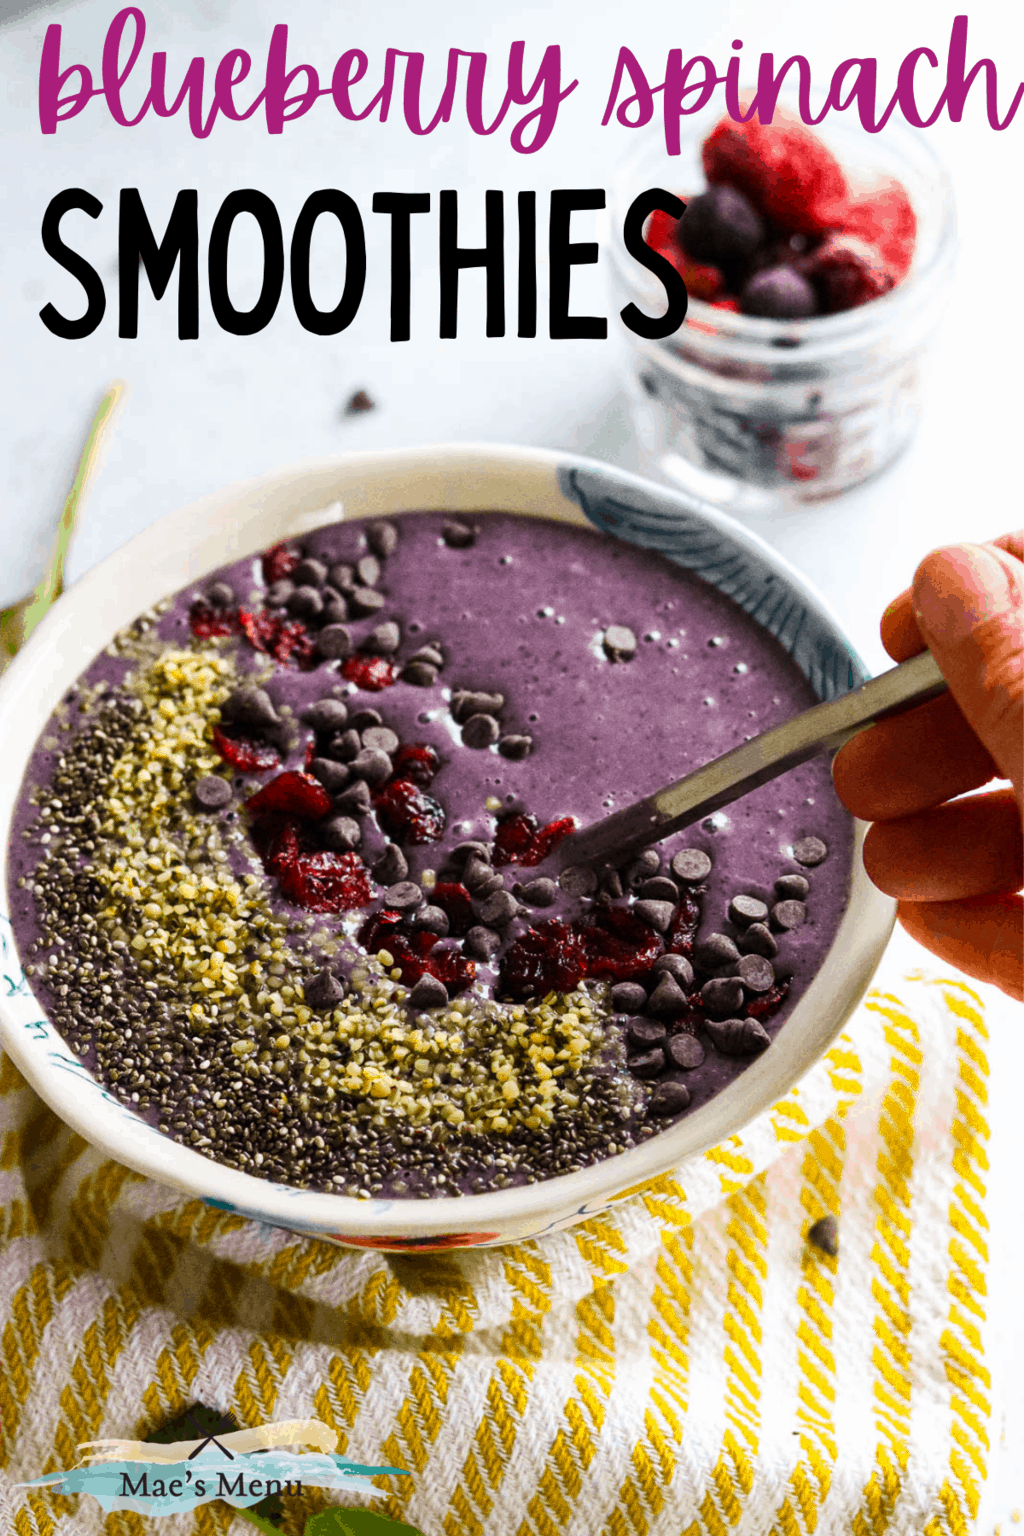 A pinterest pin for blueberry spinach smoothies with a hand scooping into a smoothie bowl of the smoothie